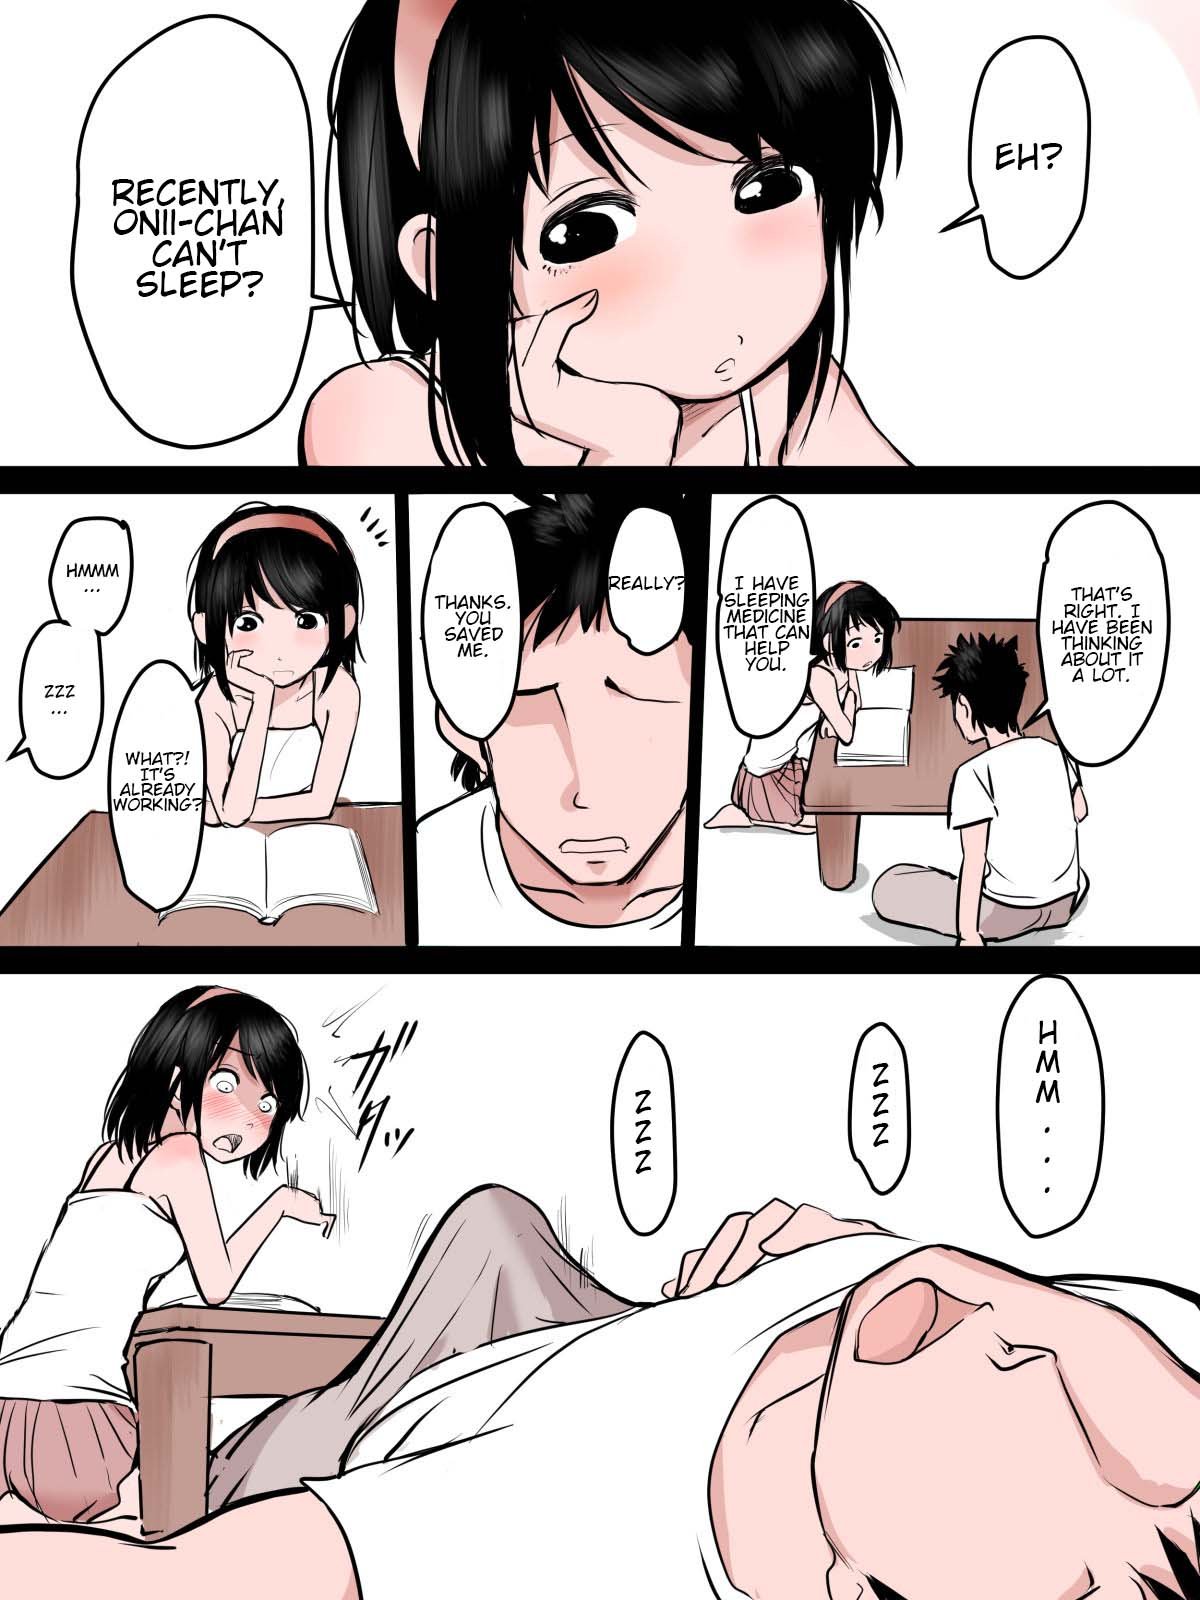 Little Sister Masturbating With Onii-Chan's Dick comic porn - HD Porn Comics